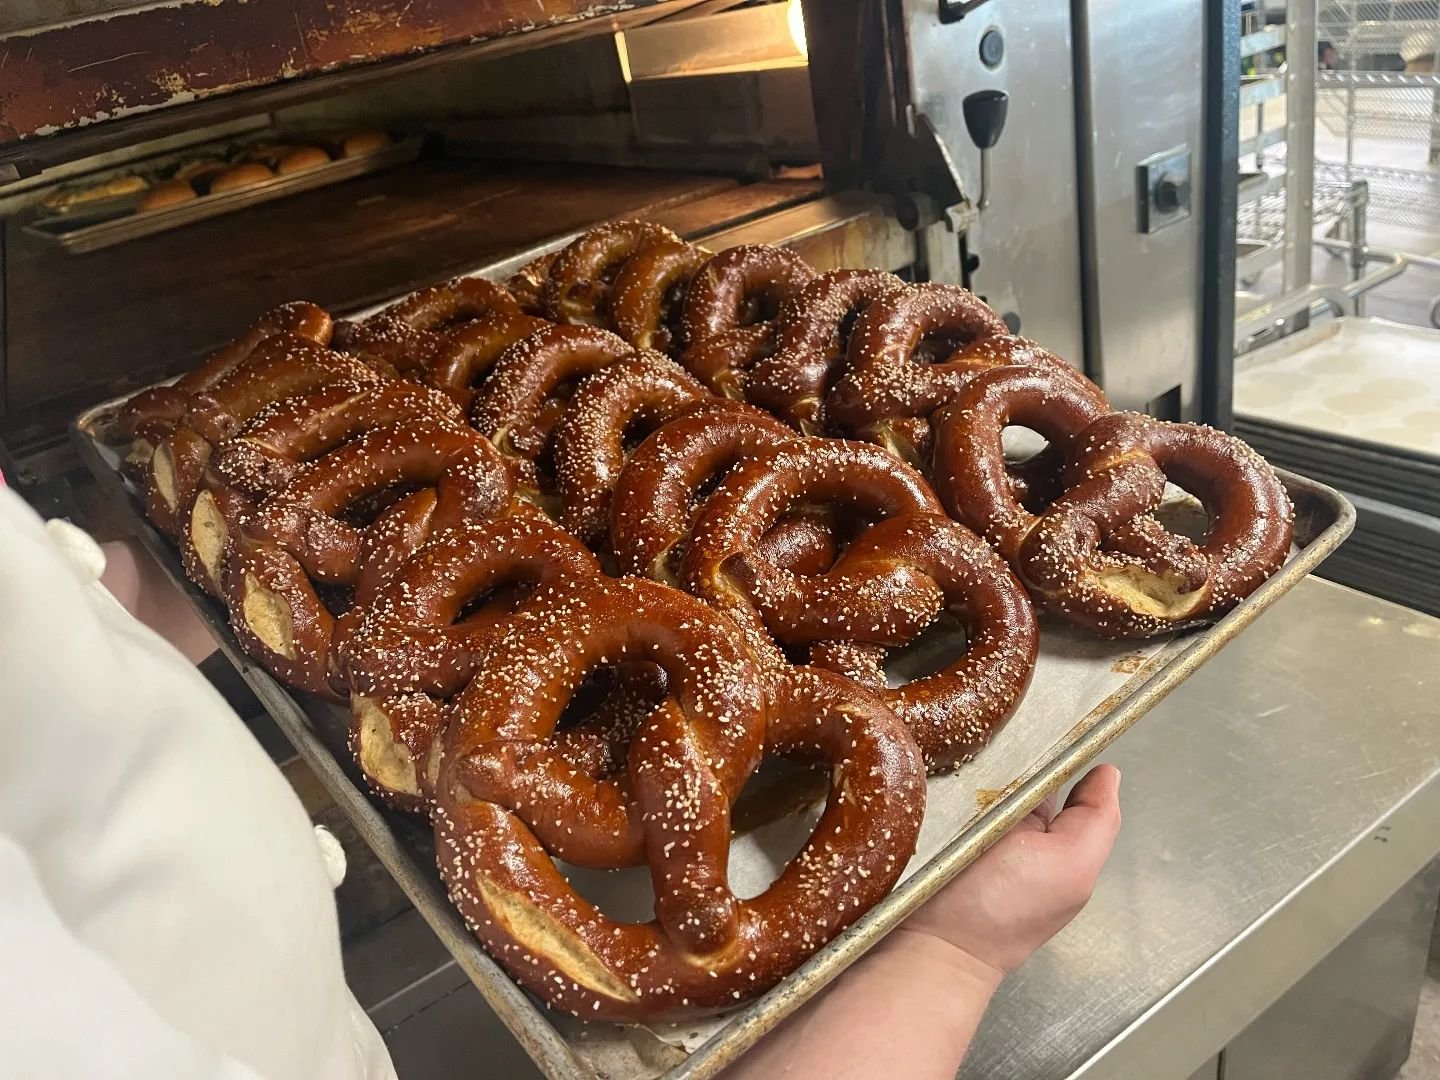 Suns out, pretzels out! Tom Duffield should be starting shortly. Enjoy some blues with your brunch today.

The Bakery is open Sundays until 3! Stop on by while you're enjoying this beautiful day.

#pretzel #kalamazoo #brunch #kalamazoobrunch #kalamaz